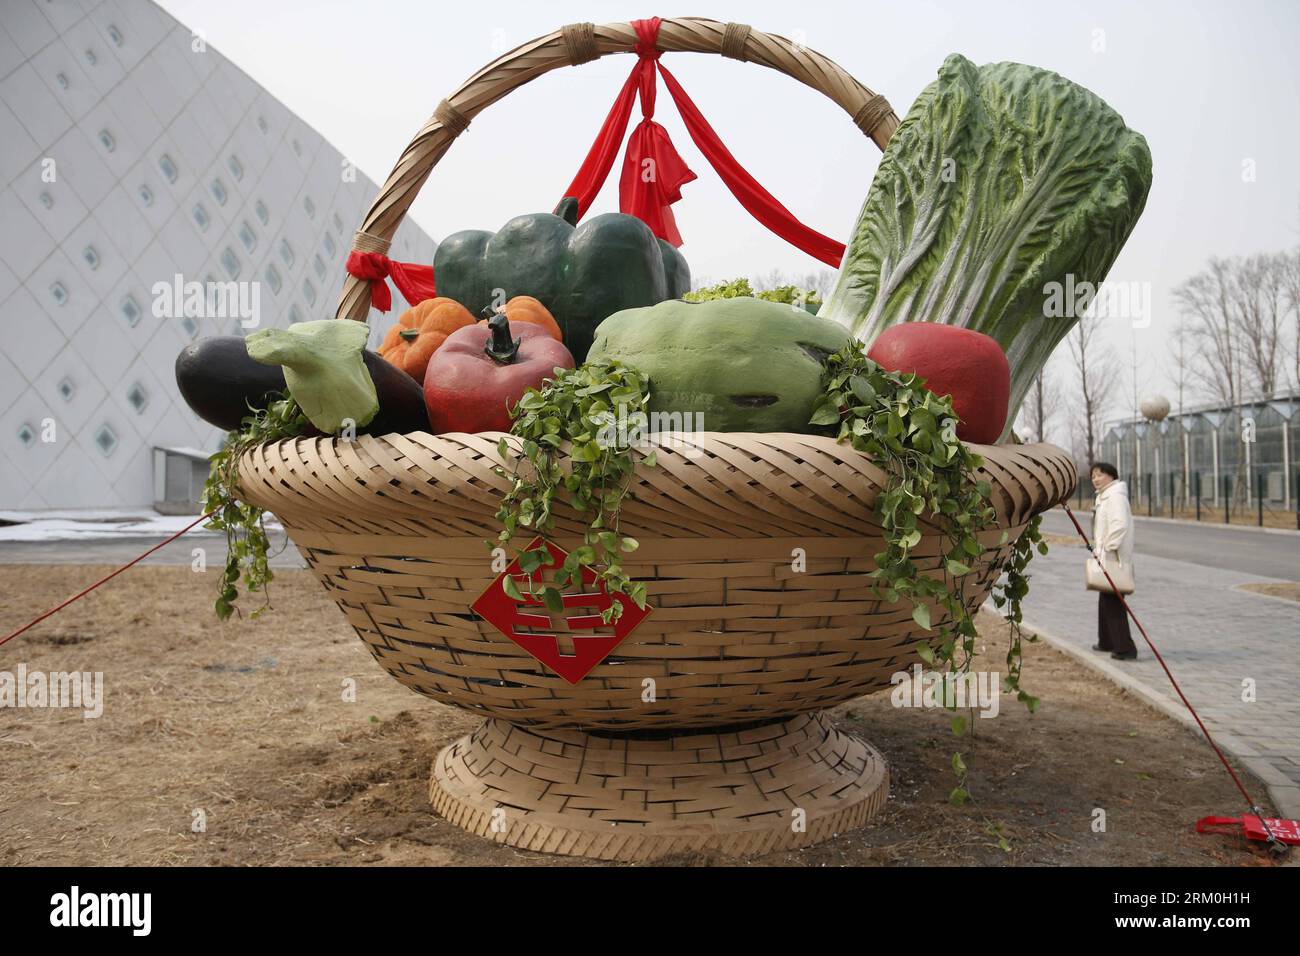 Bildnummer: 59416509  Datum: 23.03.2013  Copyright: imago/Xinhua (130323) -- BEIJING, March 23, 2013 (Xinhua) -- A giant sculpture of a vegetable basket is seen during the 1st Agriculture Carnival at the Strawberry Expo Park in Changping District, Beijing, capital of China, March 23, 2013. Opened Saturday, the carnival will continue till May 12, highlighting the latest agricultural science, technologies and creative agricultural projects. (Xinhua/Li Xin) (wqq) CHINA-BEIJING-AGRICULTURE CARNIVAL (CN) PUBLICATIONxNOTxINxCHN Gesellschaft x0x xsk 2013 quer      59416509 Date 23 03 2013 Copyright I Stock Photo